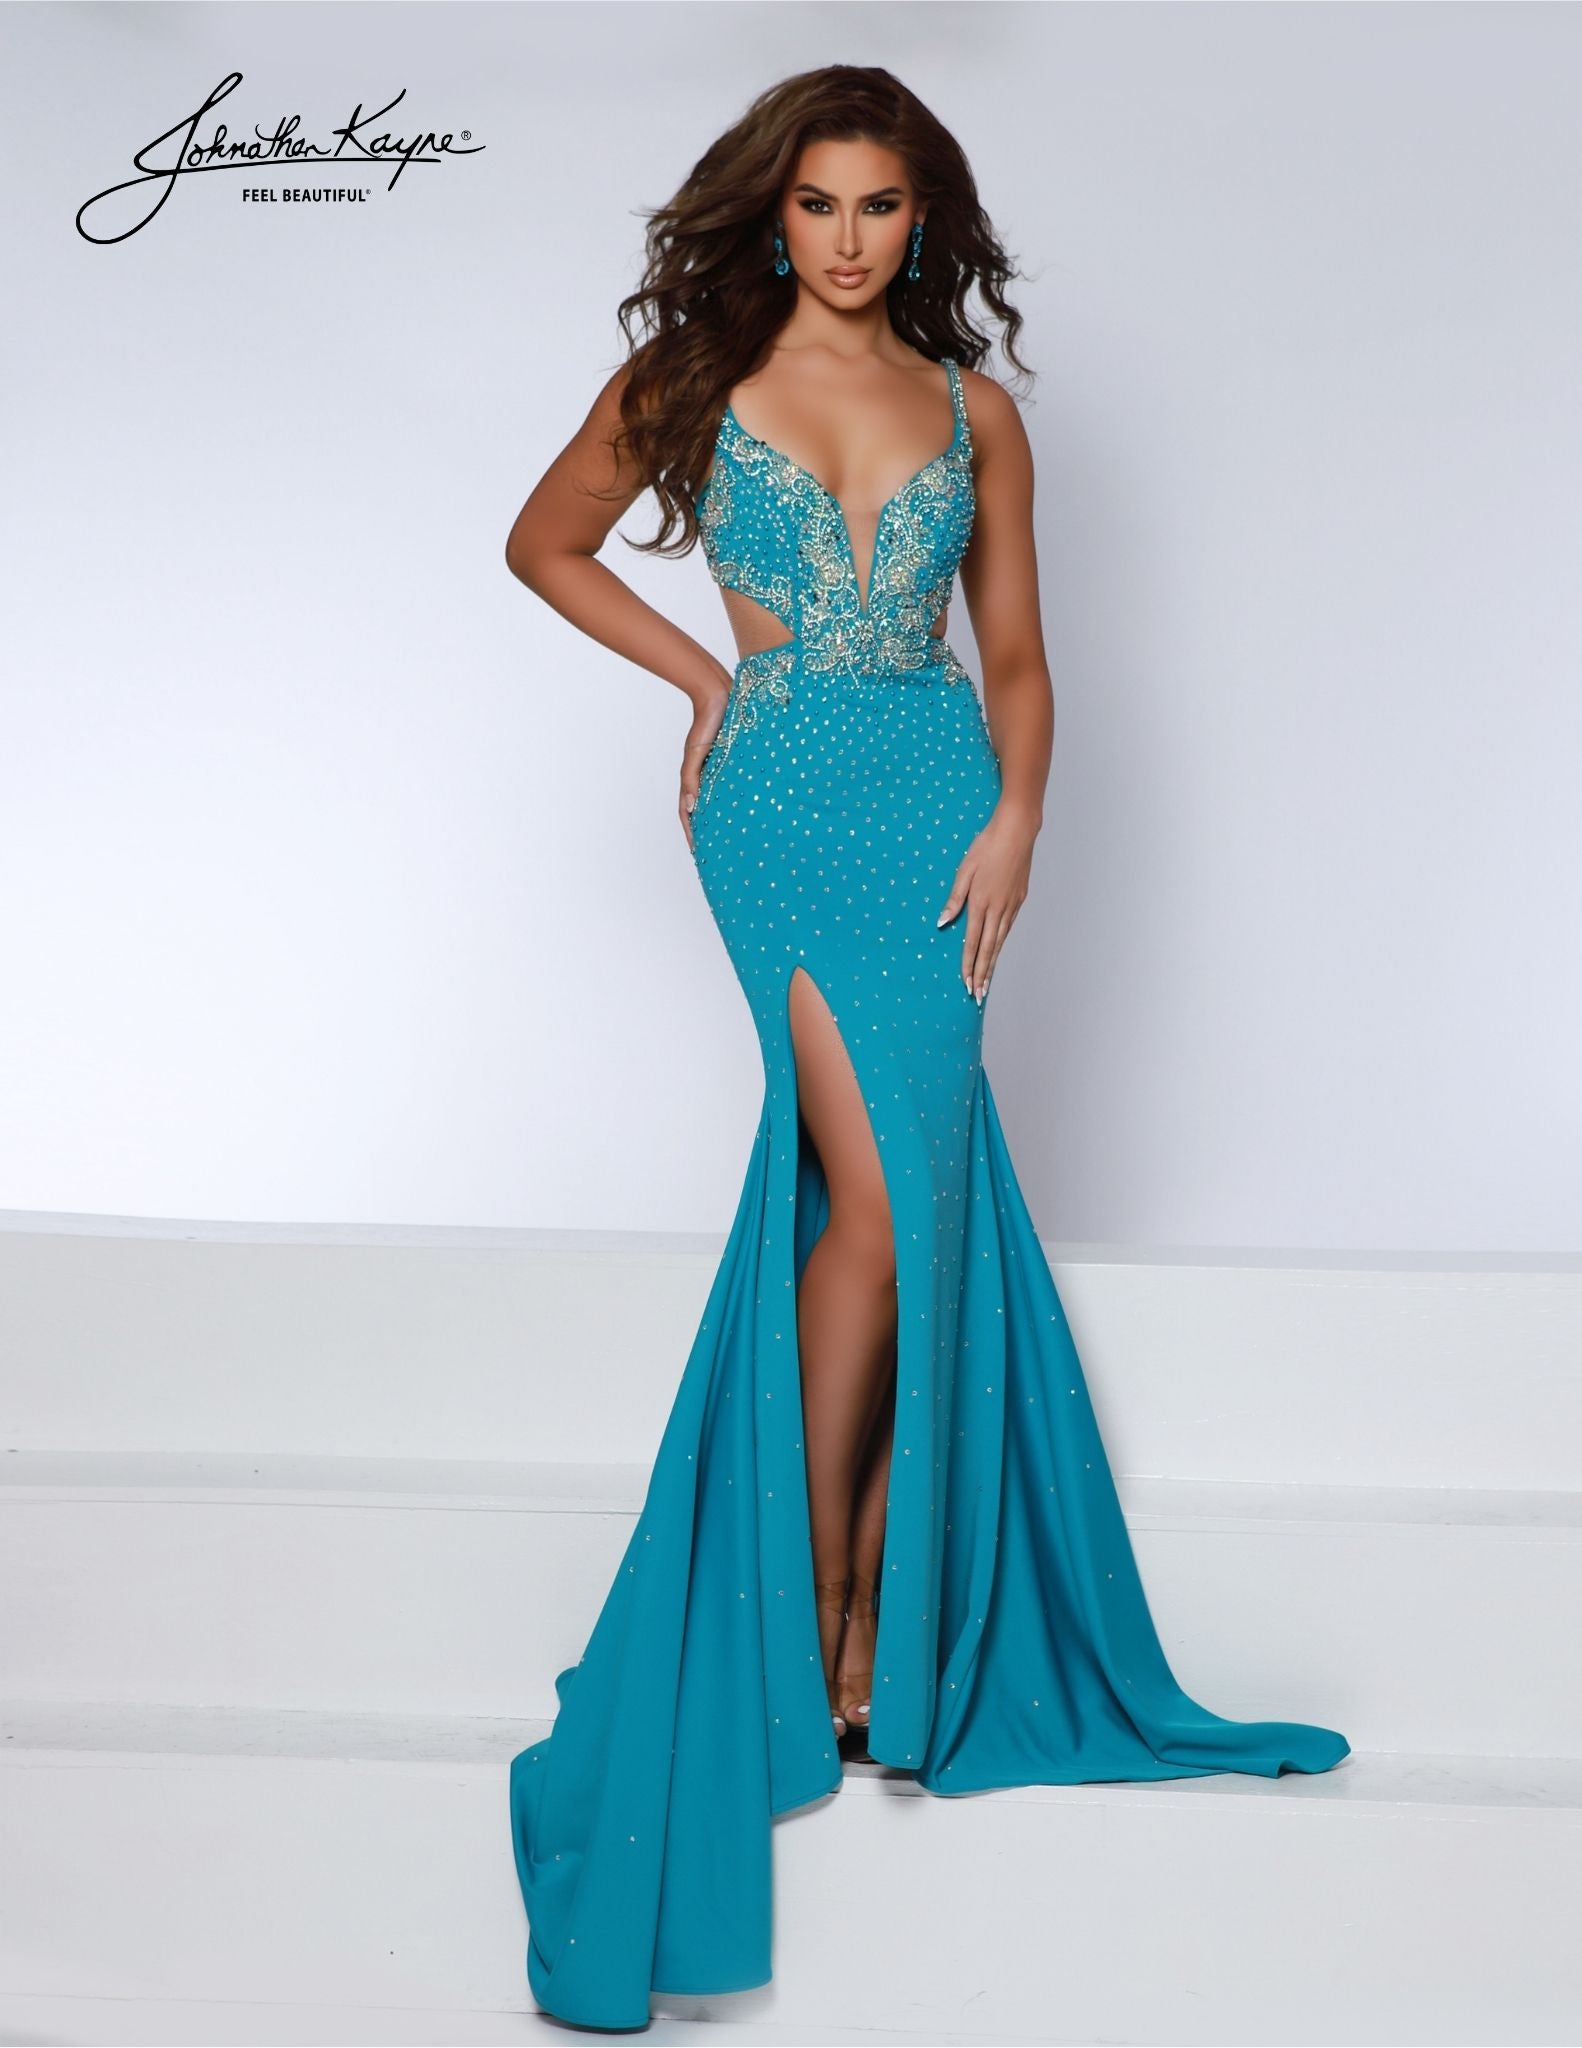 Johnathan Kayne 2846 is the perfect long prom dress for special occasions. Featuring a fitted plunging neckline and a classic high slit, this sophisticated formal pageant gown is complete with side cut outs. Look your best in this stunning evening look. Steal the spotlight in this heavy knit gown. Flirty side cutouts, thigh-high slit, and a corset closure transform this dress into a show-stopping statement of style.